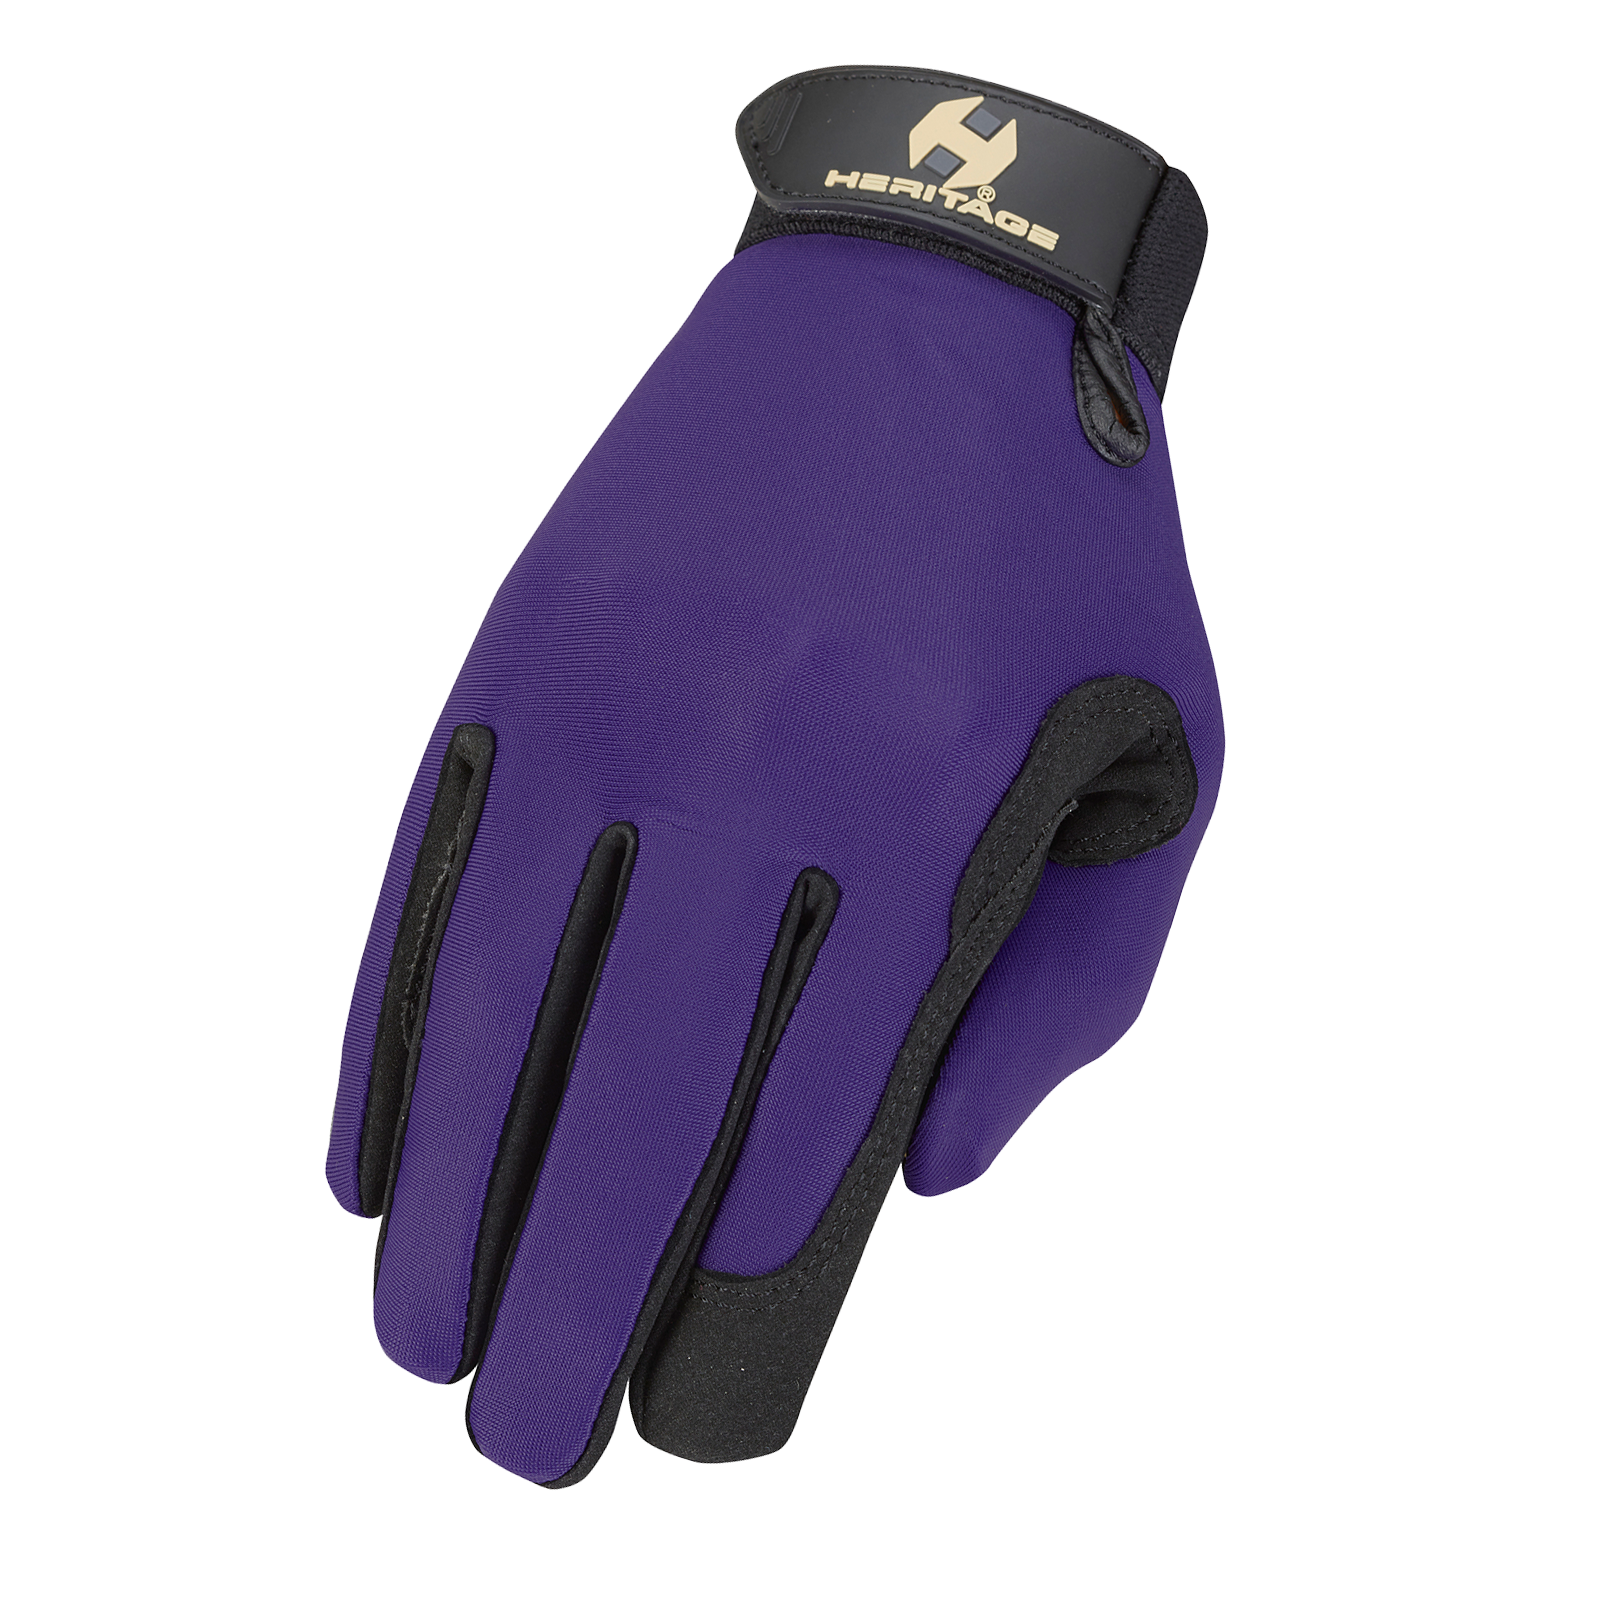 Size Large Purple Shires Adults Newury Horse Riding Gloves